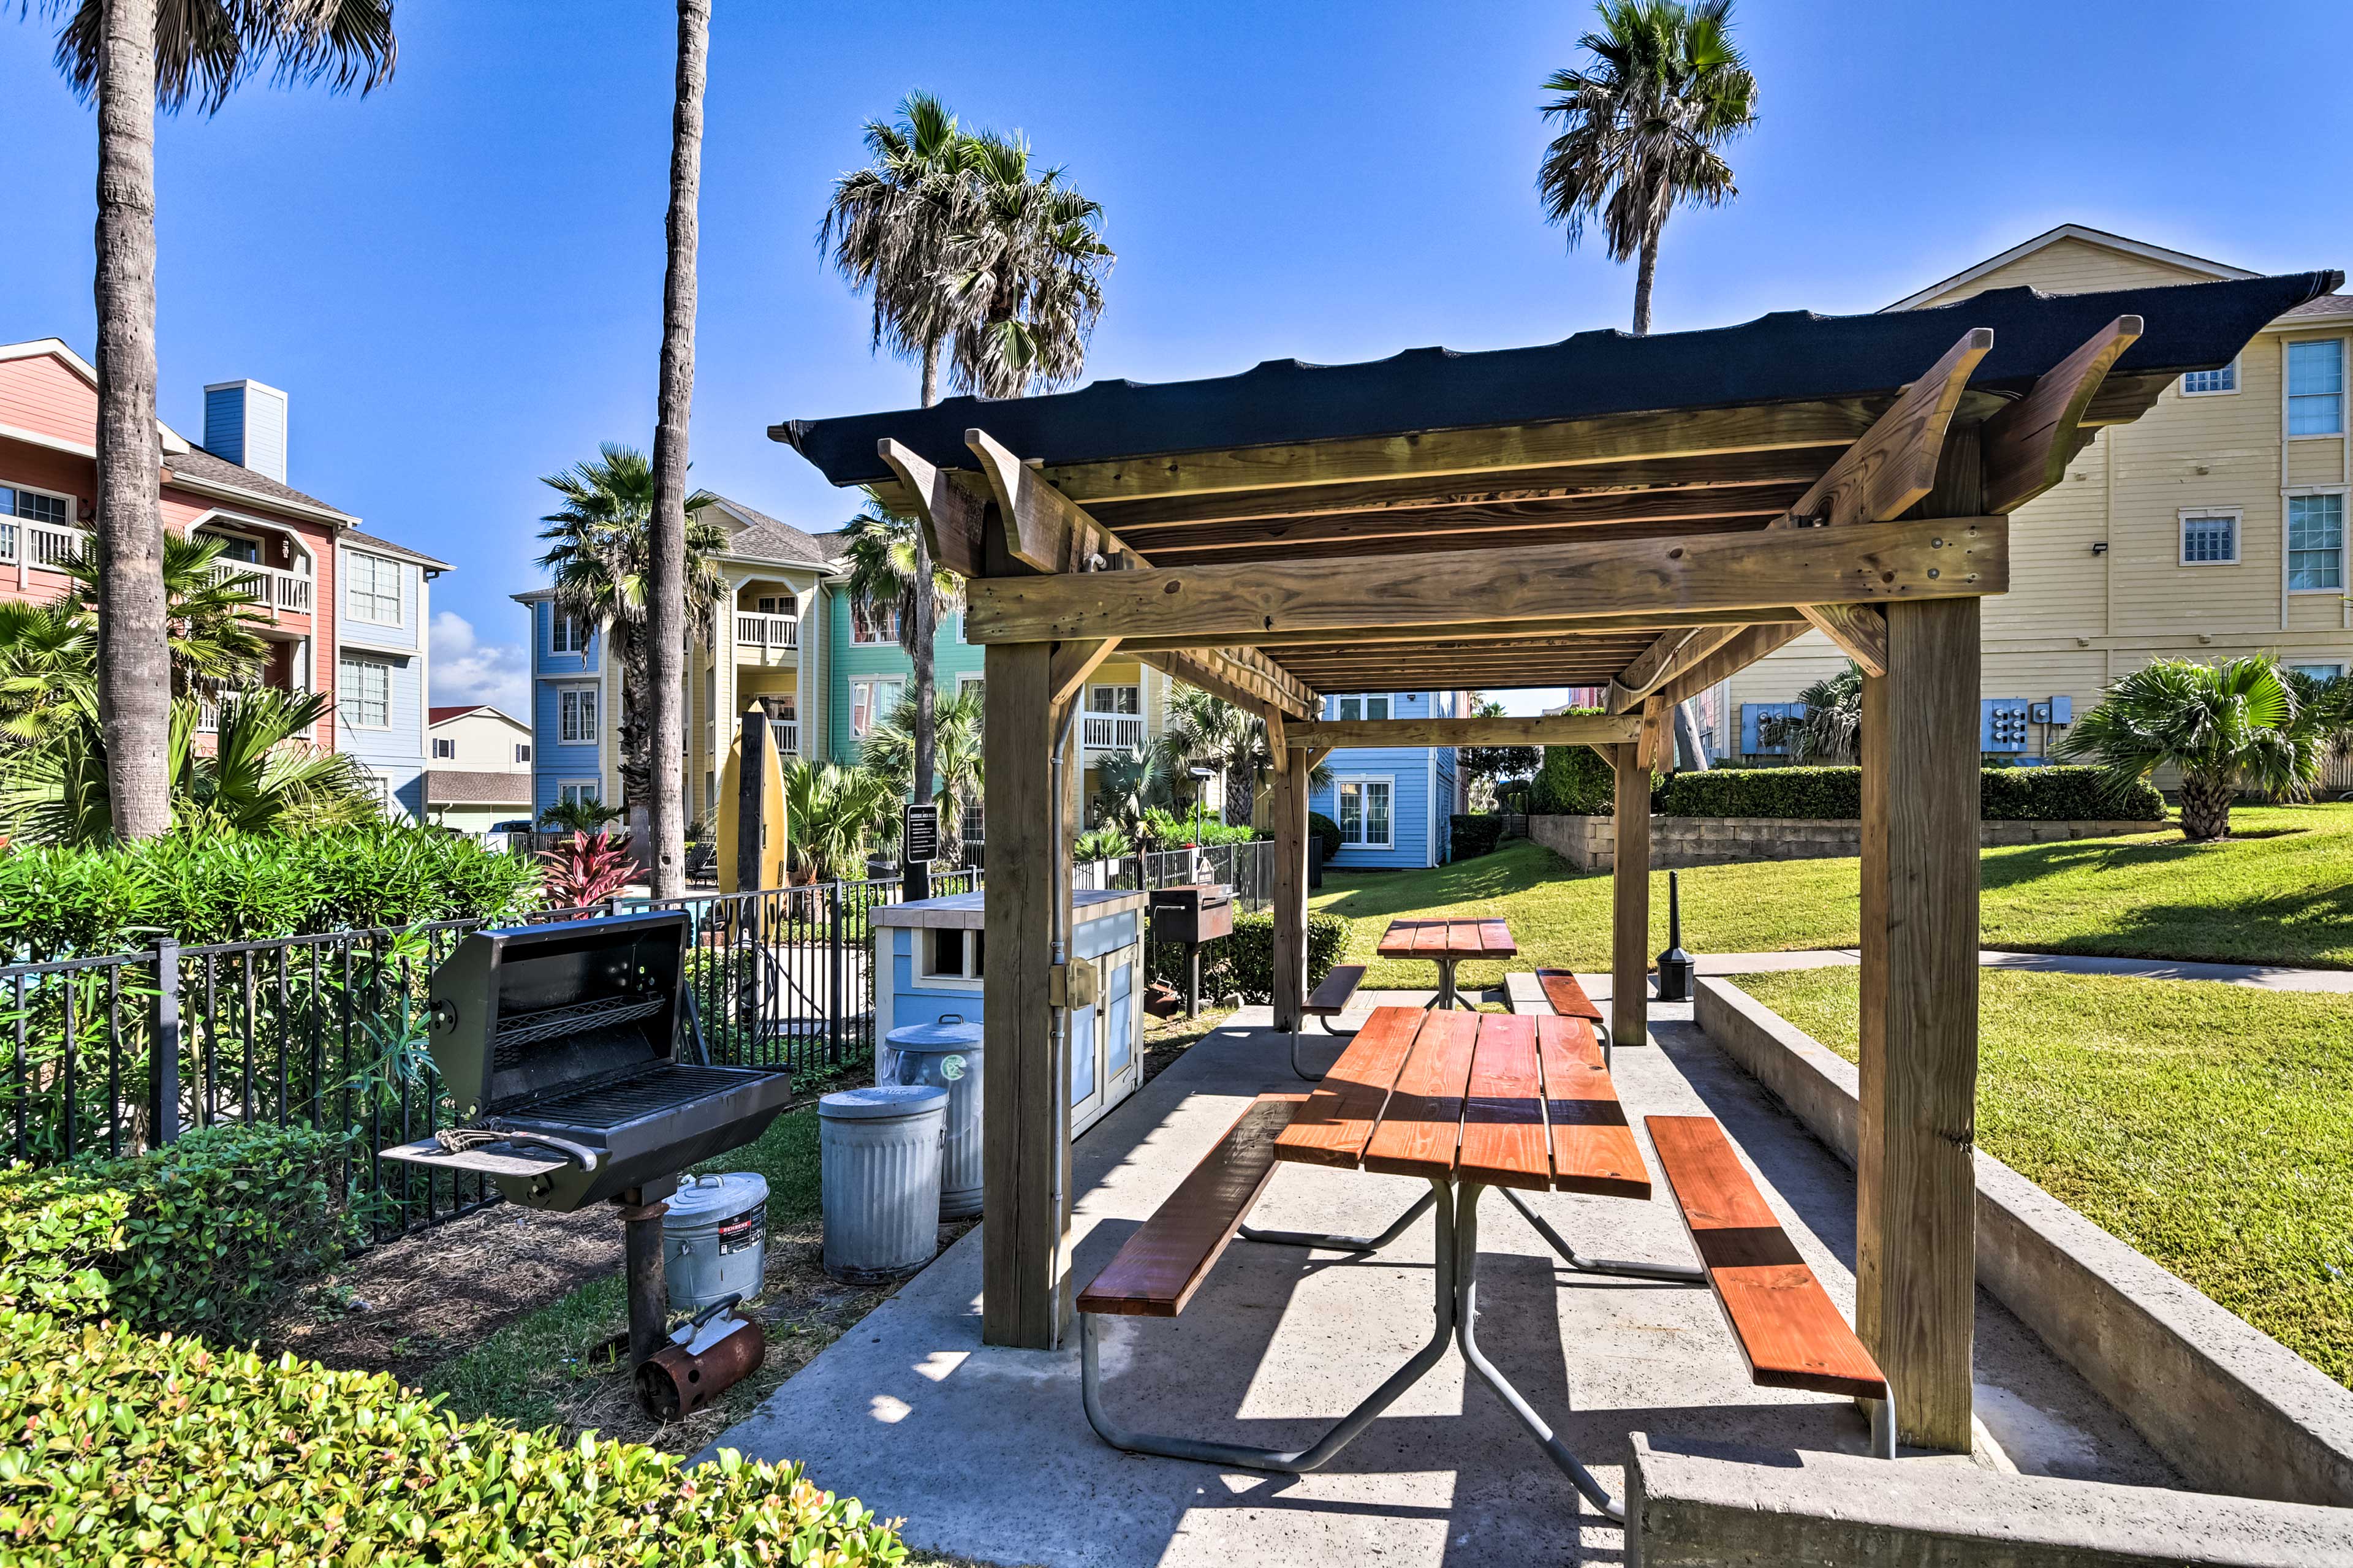 Community Amenities | Charcoal Grills | Picnic Tables